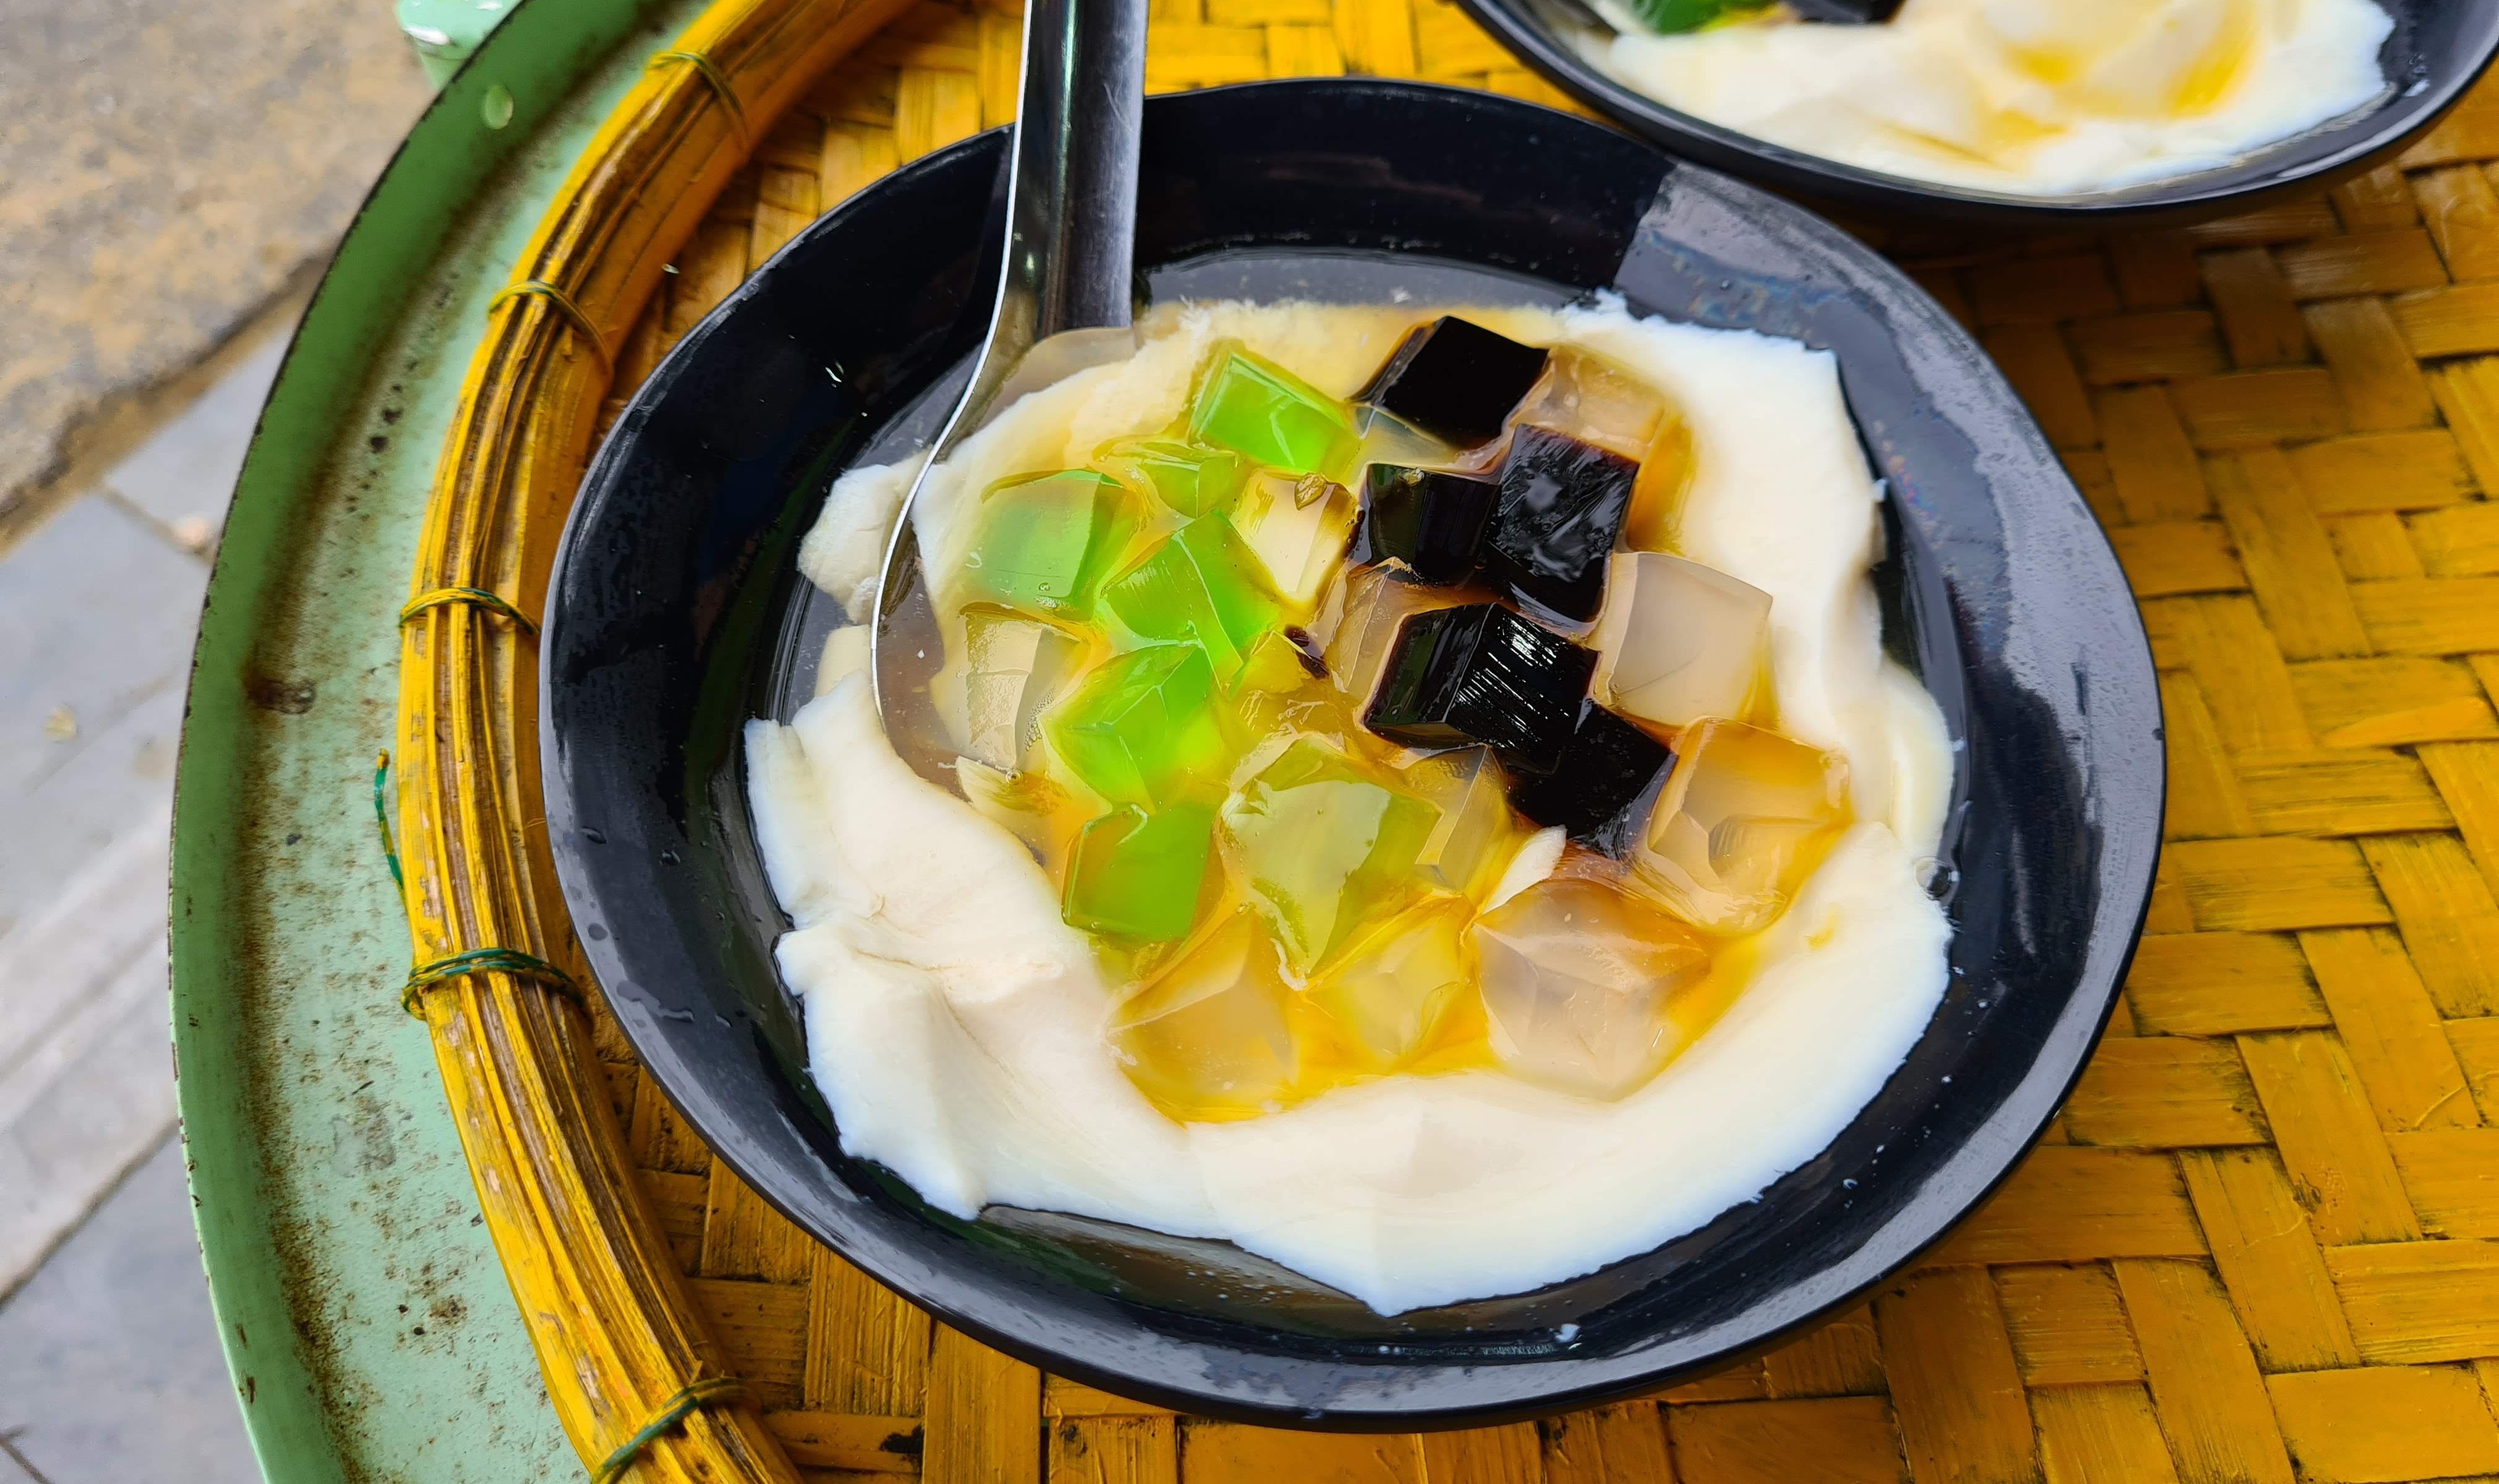 A bowl of tau pho (sweet tofu soup) in Hoi An Ancient Town, Quang Nam Province, Vietnam. Photo: Duy Khang / Tuoi Tre